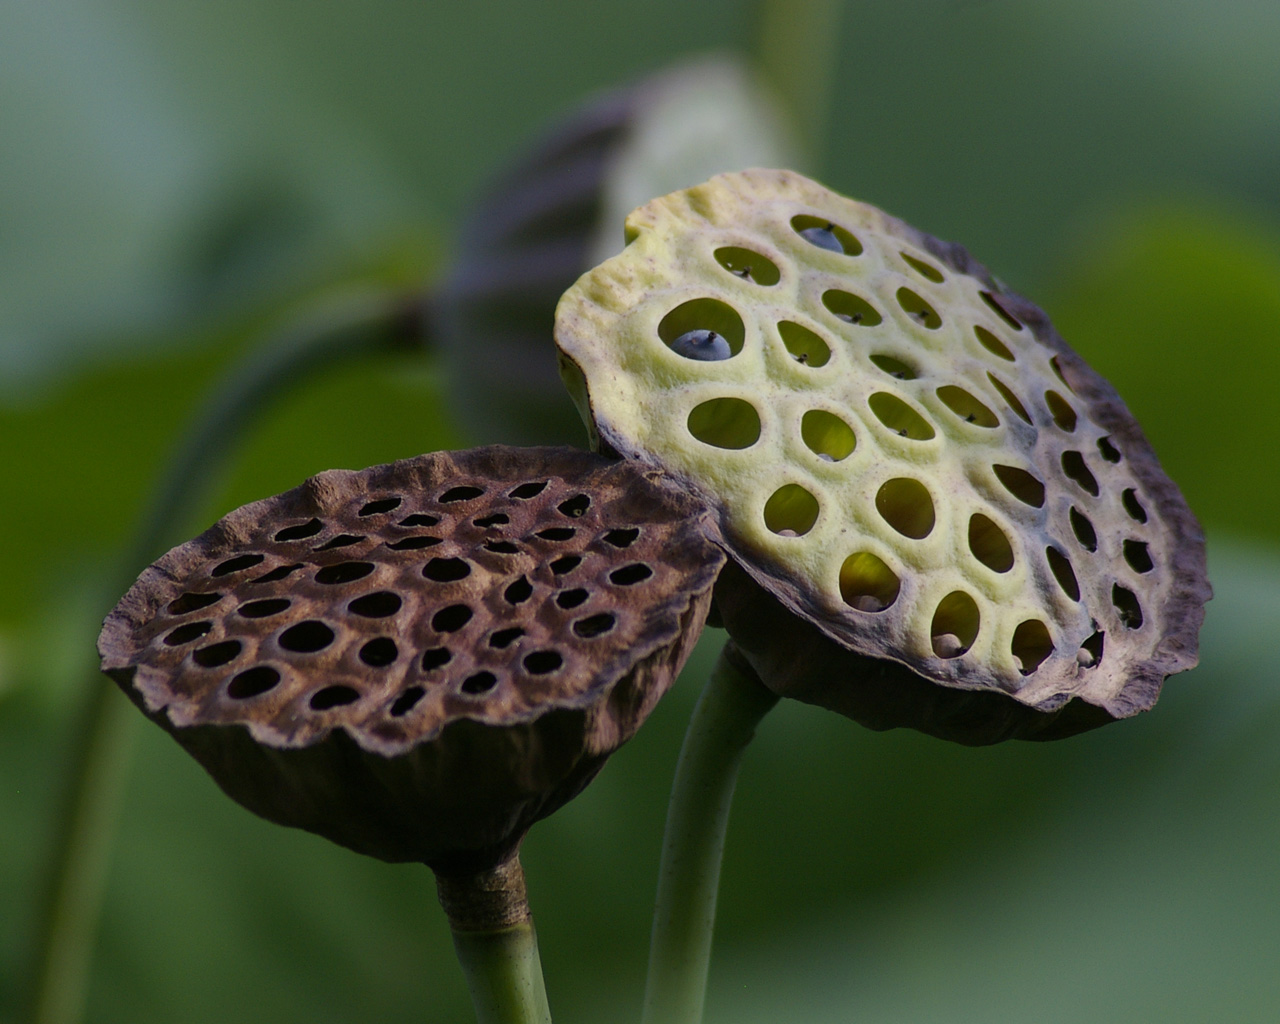 File:Lotus seed pods.jpg - Wikimedia Commons